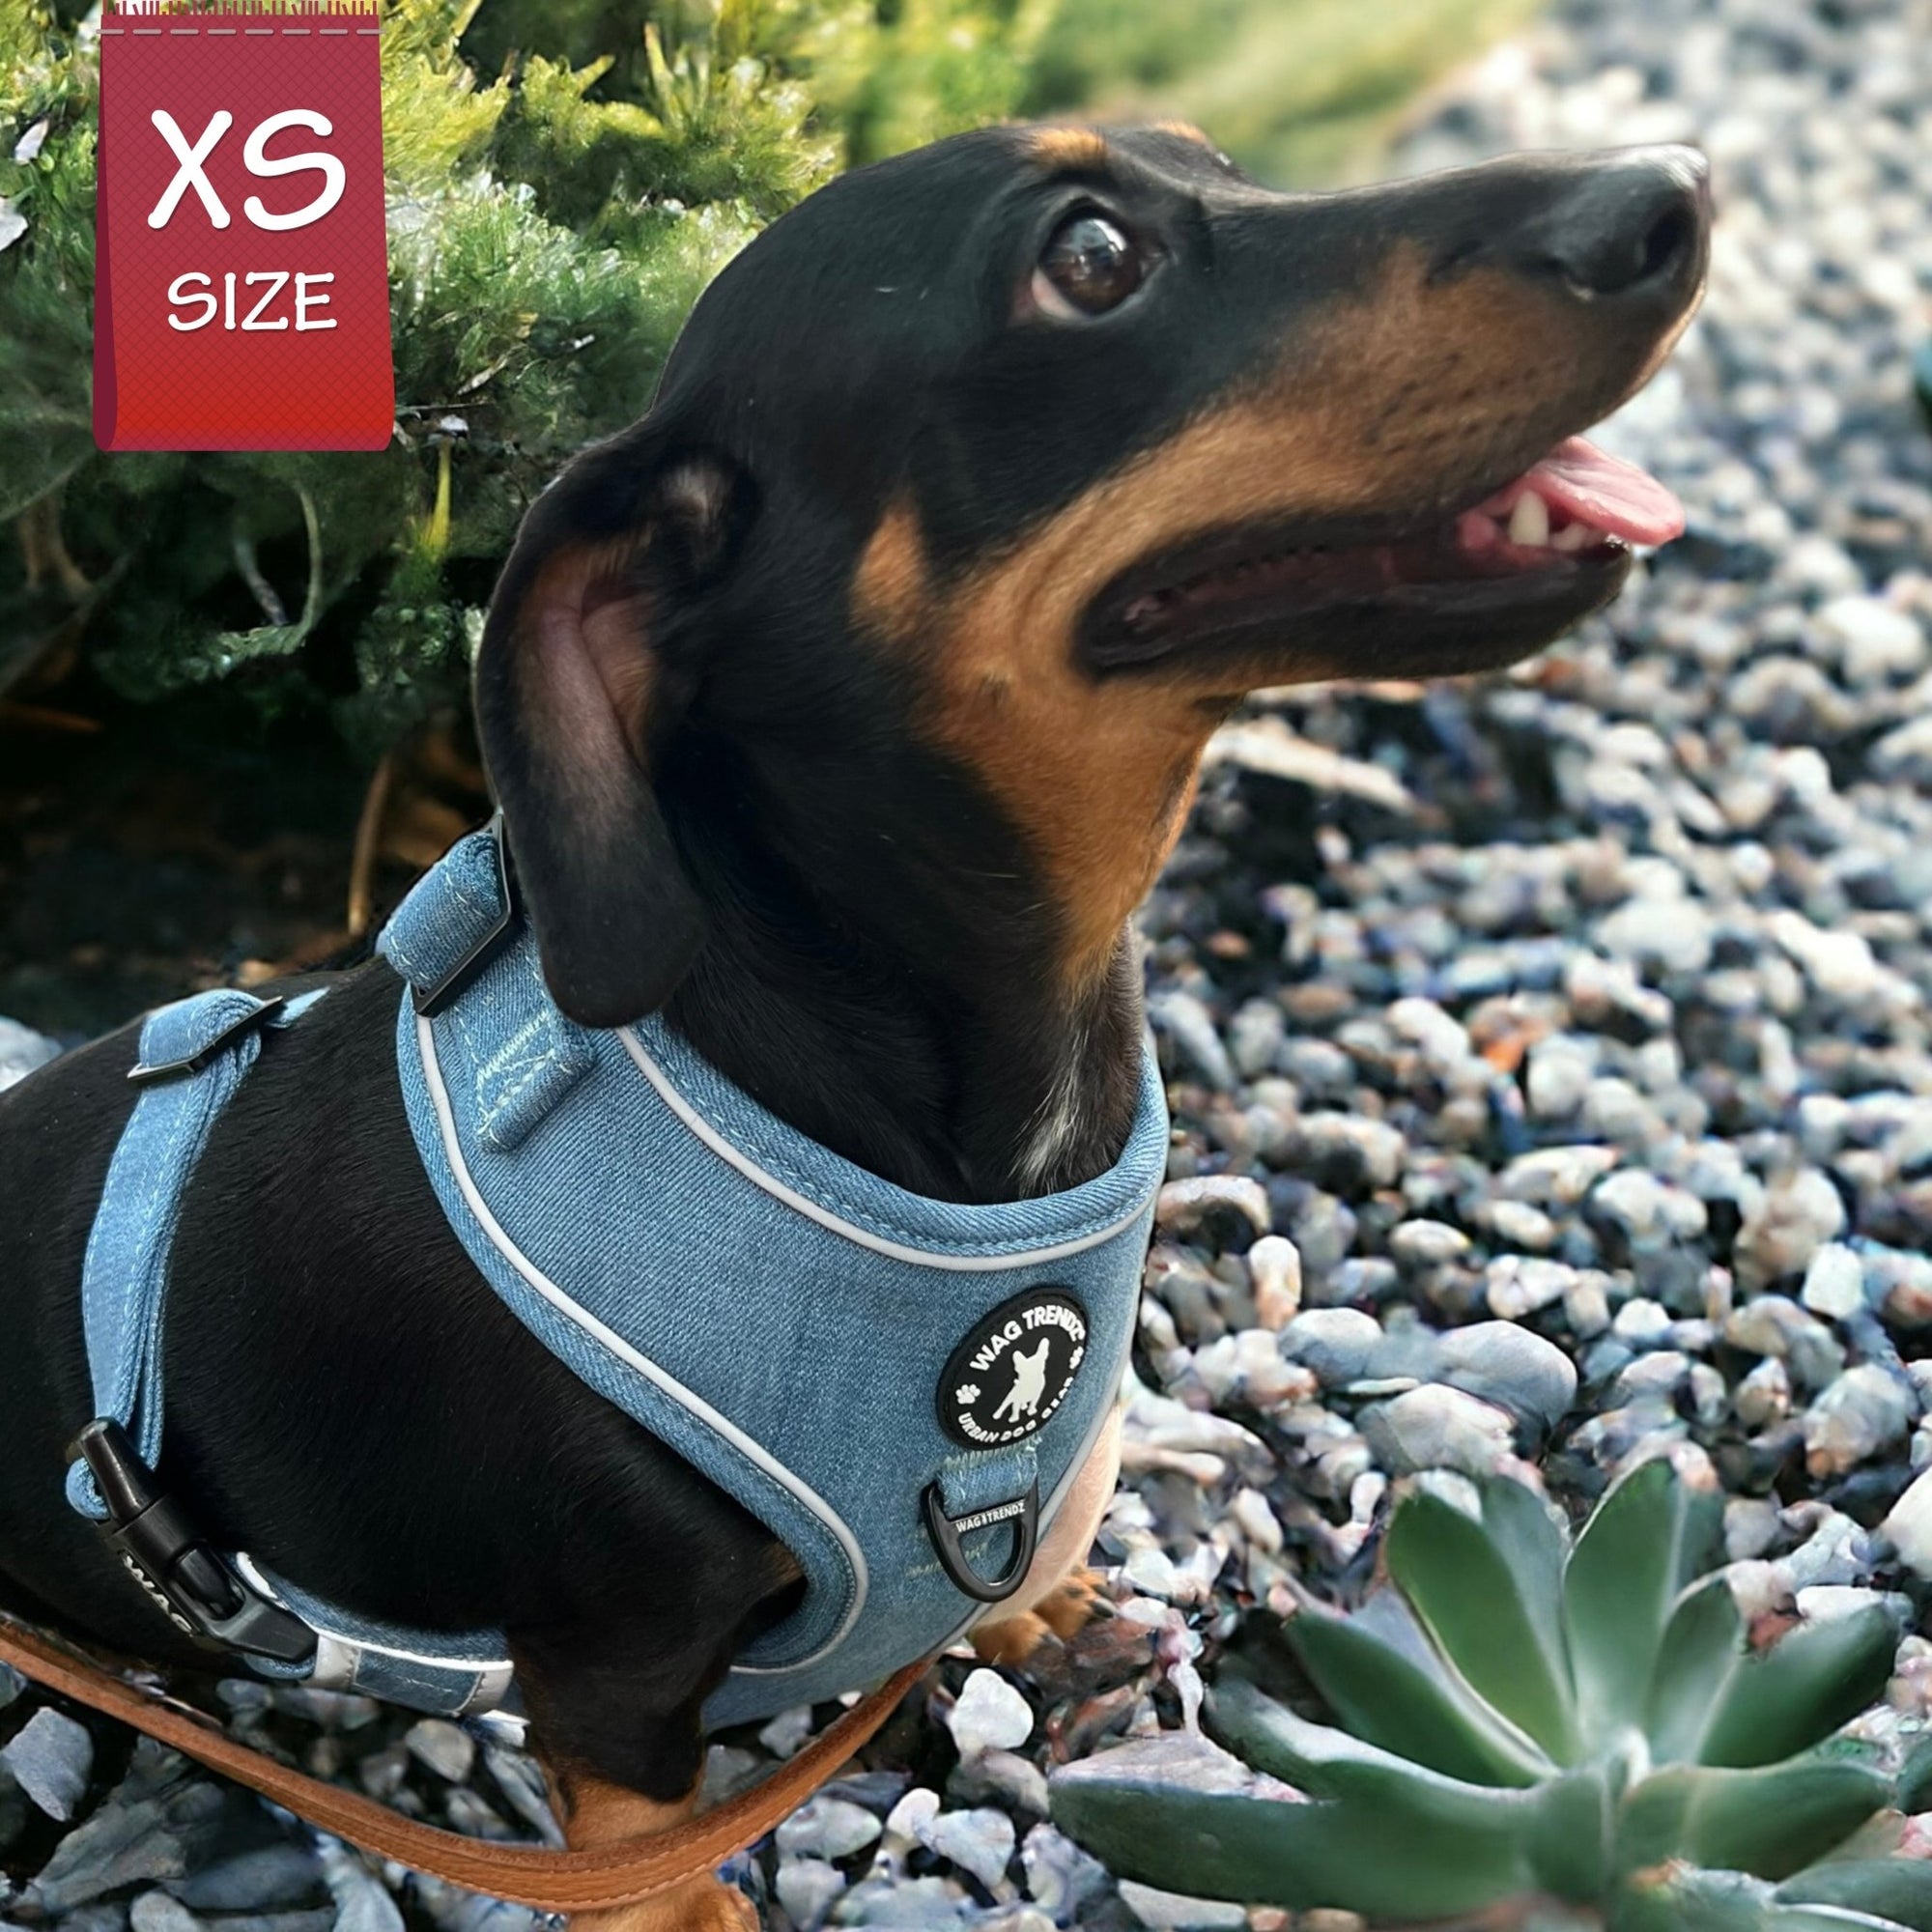 Harness and Leash Set + Poop Bag Holder - Dachshund wearing Downtown Denim Dog Harness with reflective accents - sitting on pebble sidewalk with succulents around - Wag Trendz